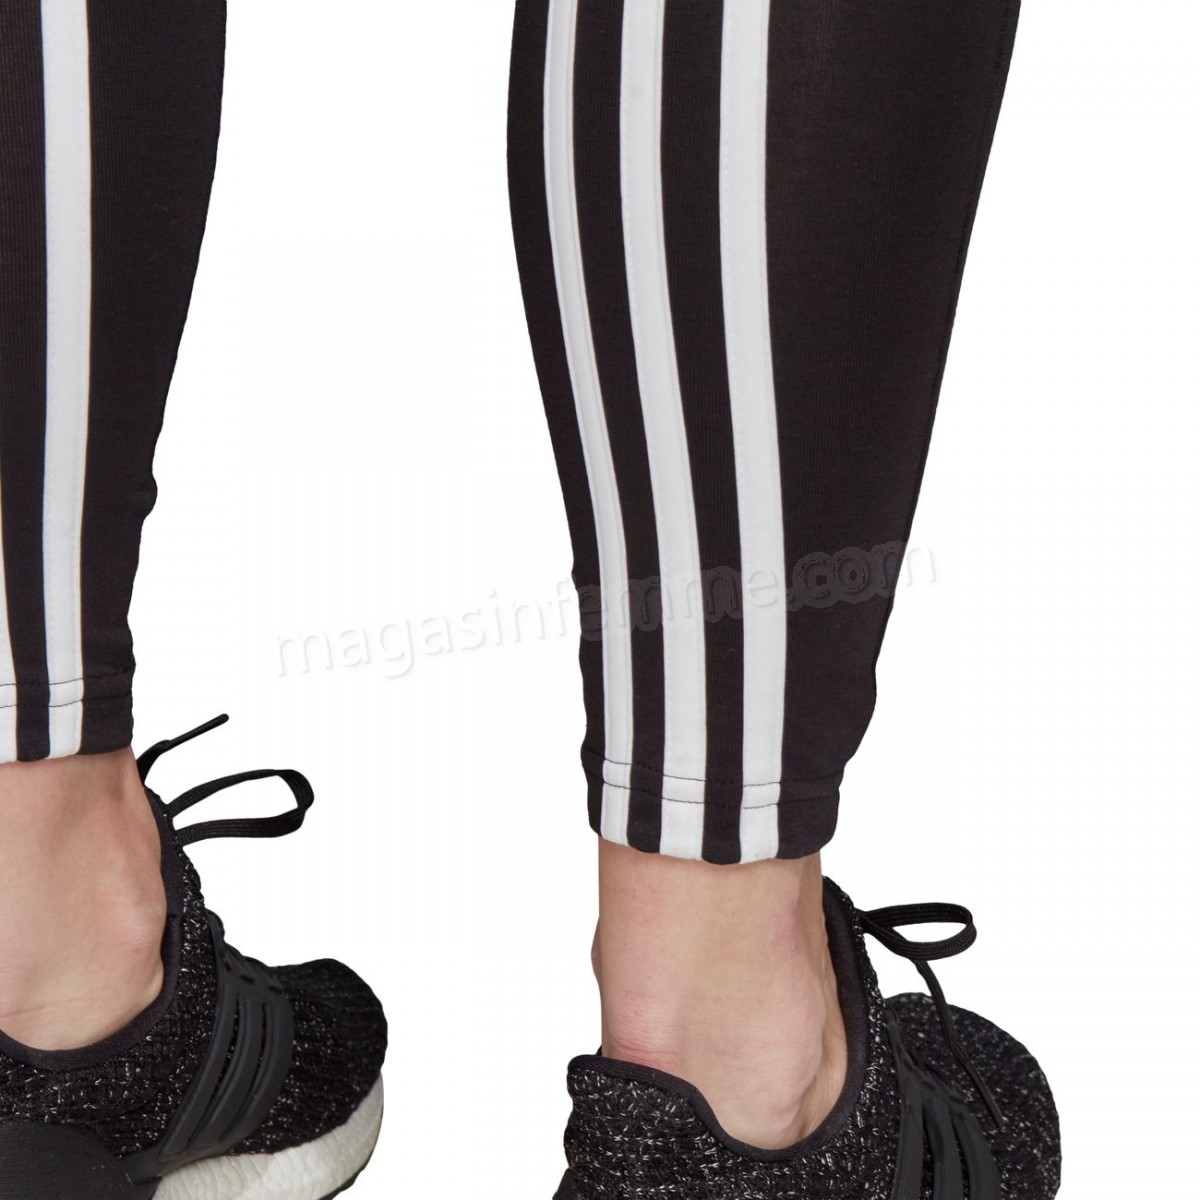 Adidas-Fitness femme ADIDAS Collant femme adidas Must Haves 3-Stripes en solde - -12